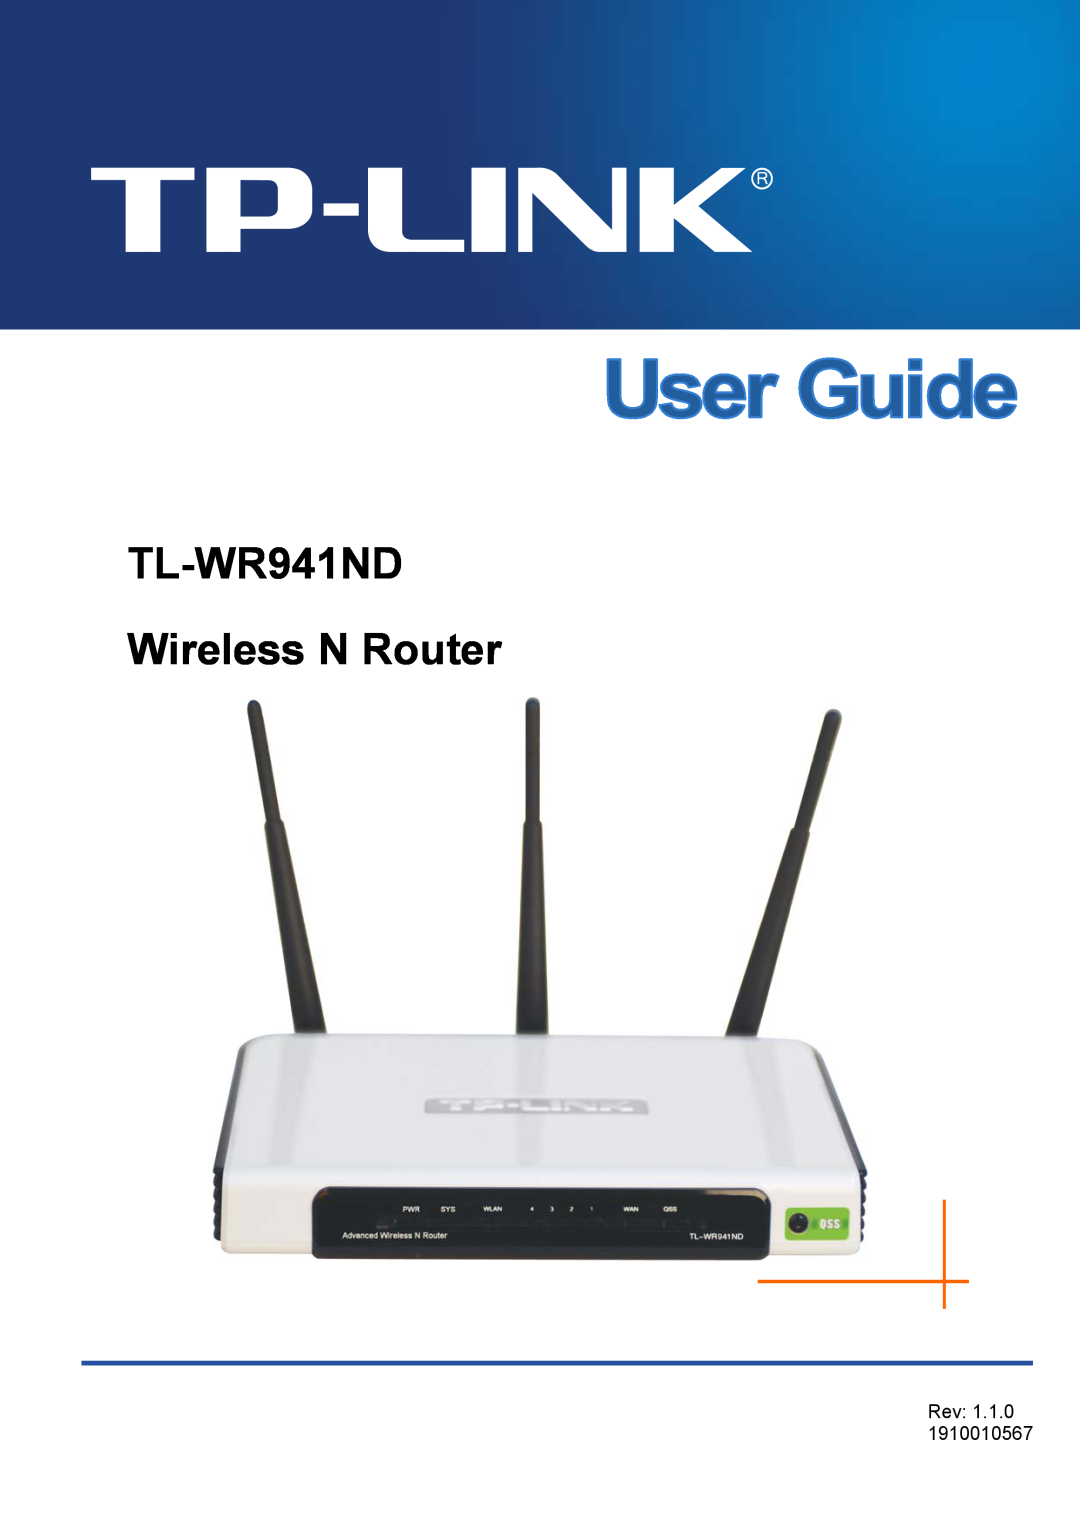 TP-Link manual TL-WR941ND Wireless N Router, Rev 1.1.0 